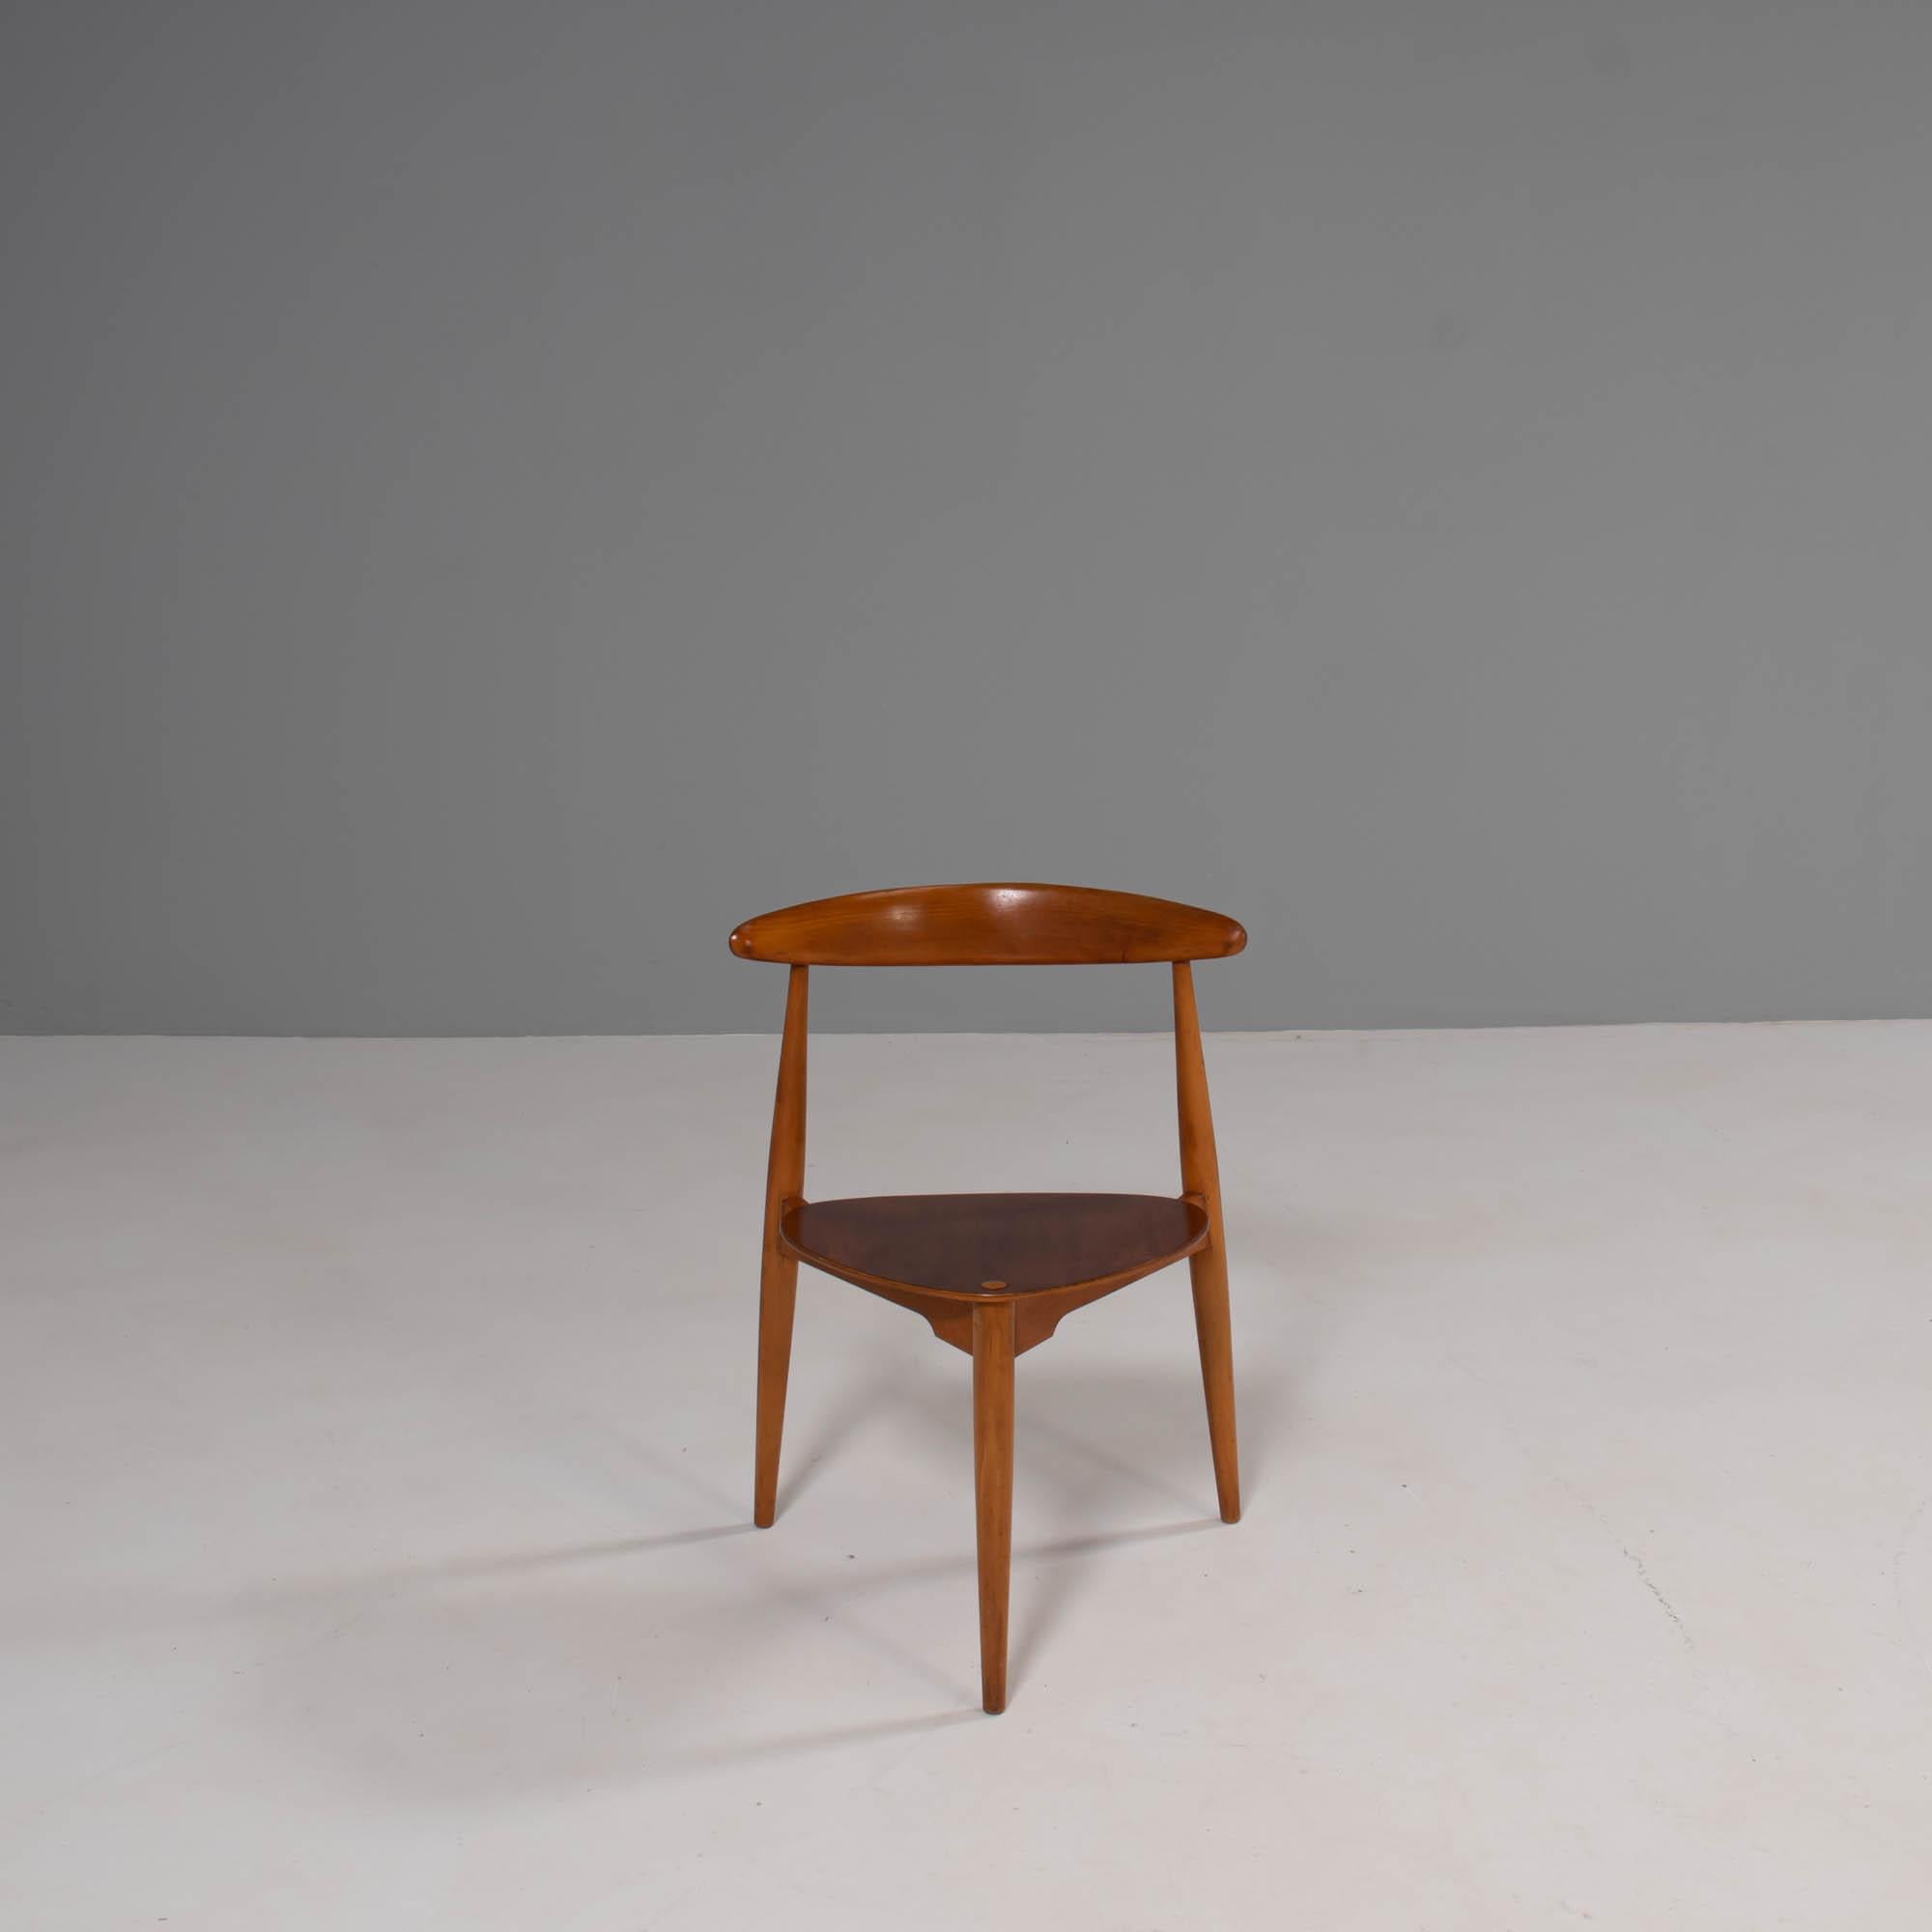 Originally designed by Hans Wegner in the 1950s, the FH4103 was manufactured by Fritz Hansen and sold in London by Story’s of Kensington.

Constructed from beech and teak wood, the FH4103 chairs are also known as the ‘heart’ chairs, due to their